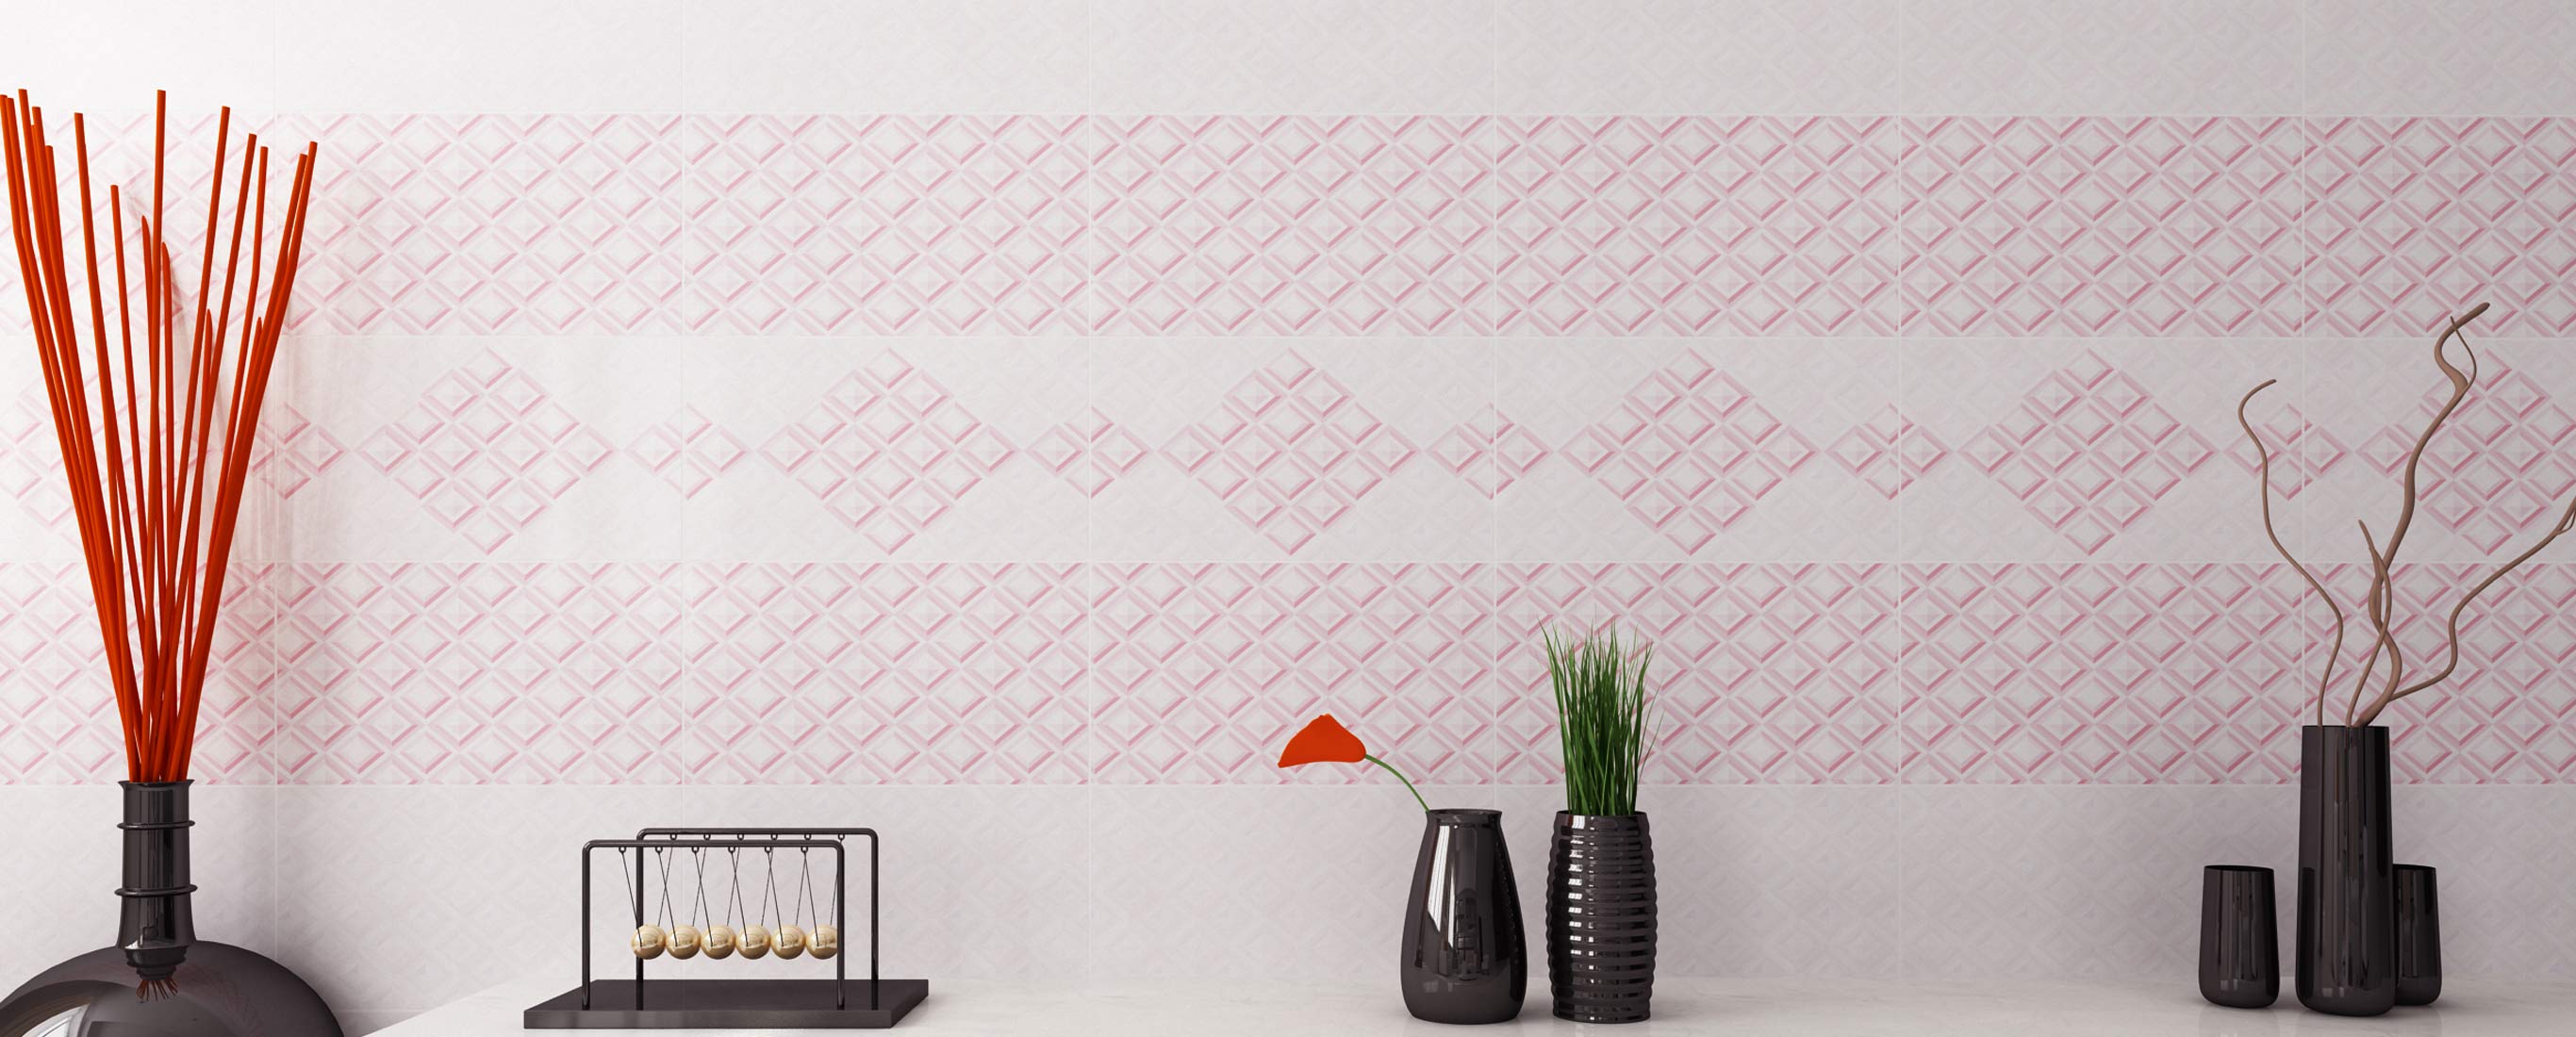 Most Elegant Wall Tiles Design in Bangladesh for Your Home